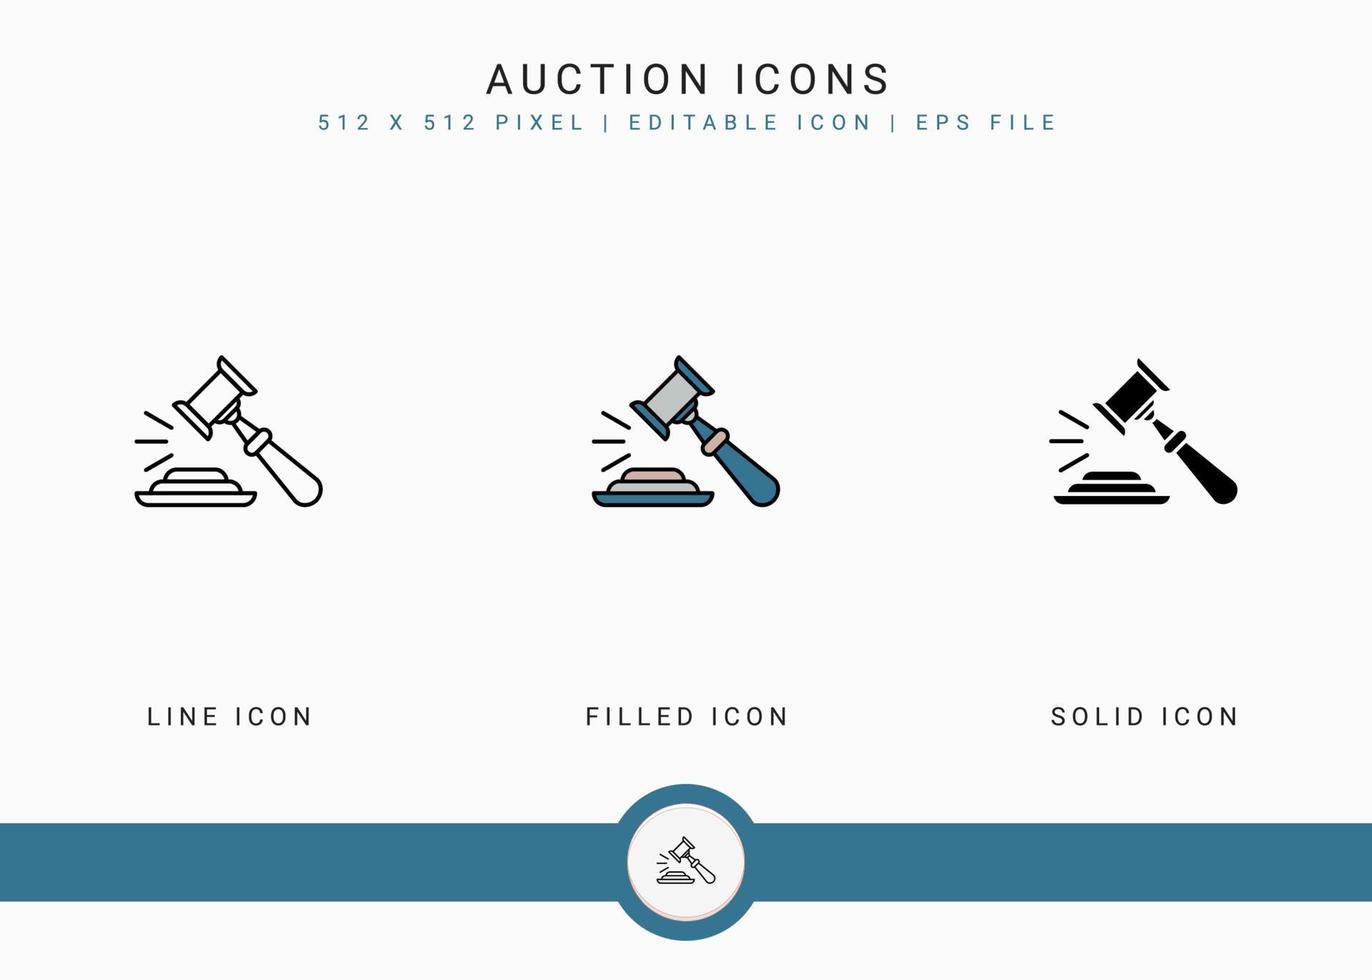 Auction icons set vector illustration with solid icon line style. Bid deal act concept. Editable stroke icon on isolated background for web design, user interface, and mobile application